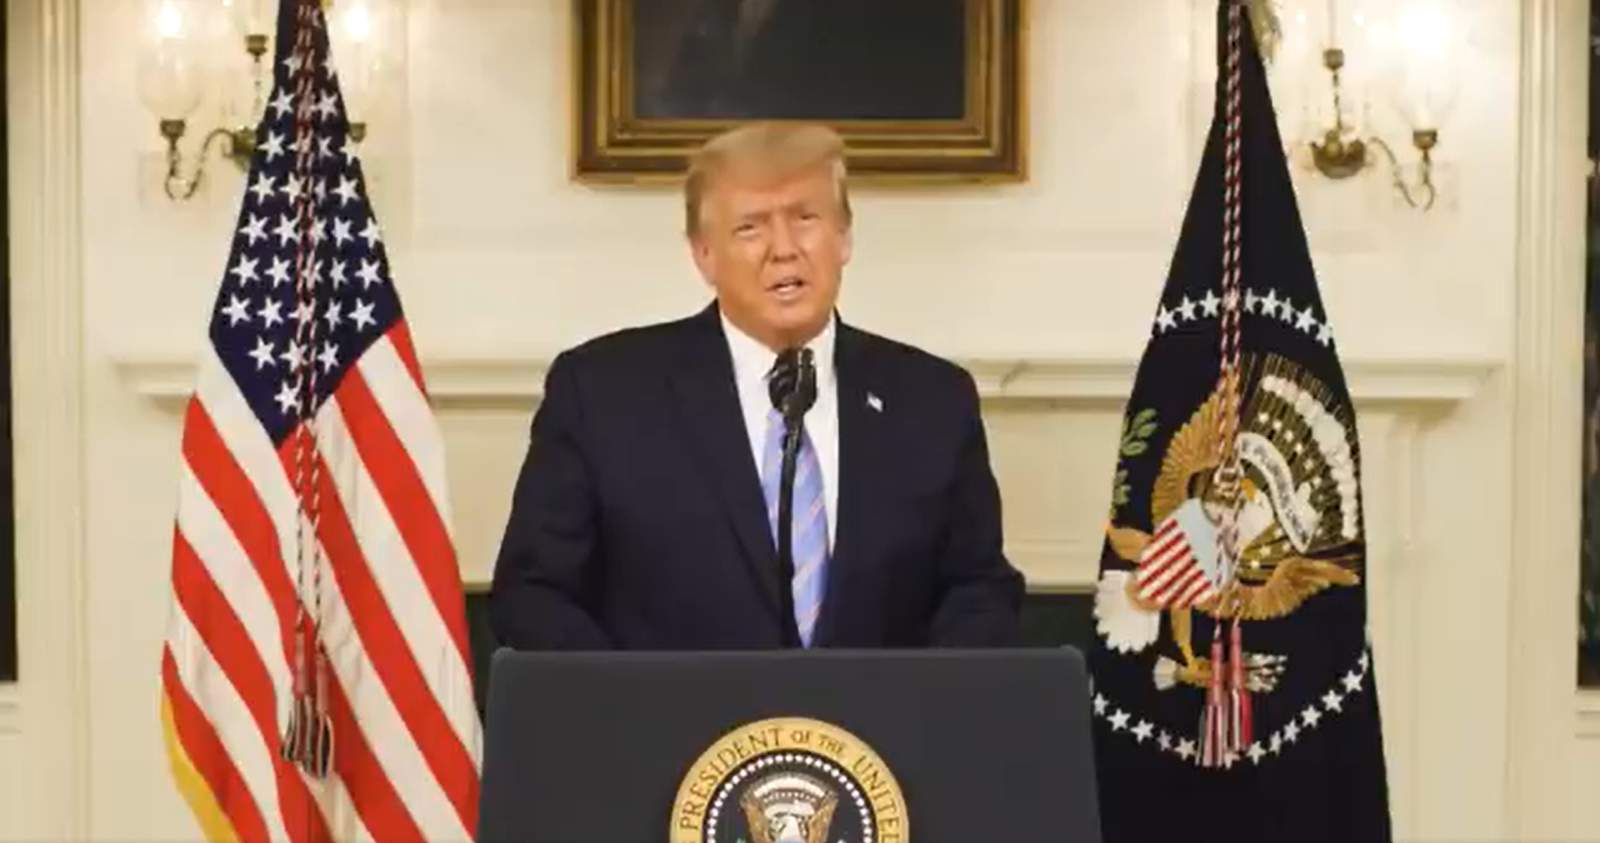 President Trump condemns supporters who rioted at Capitol, concedes to Biden in new video